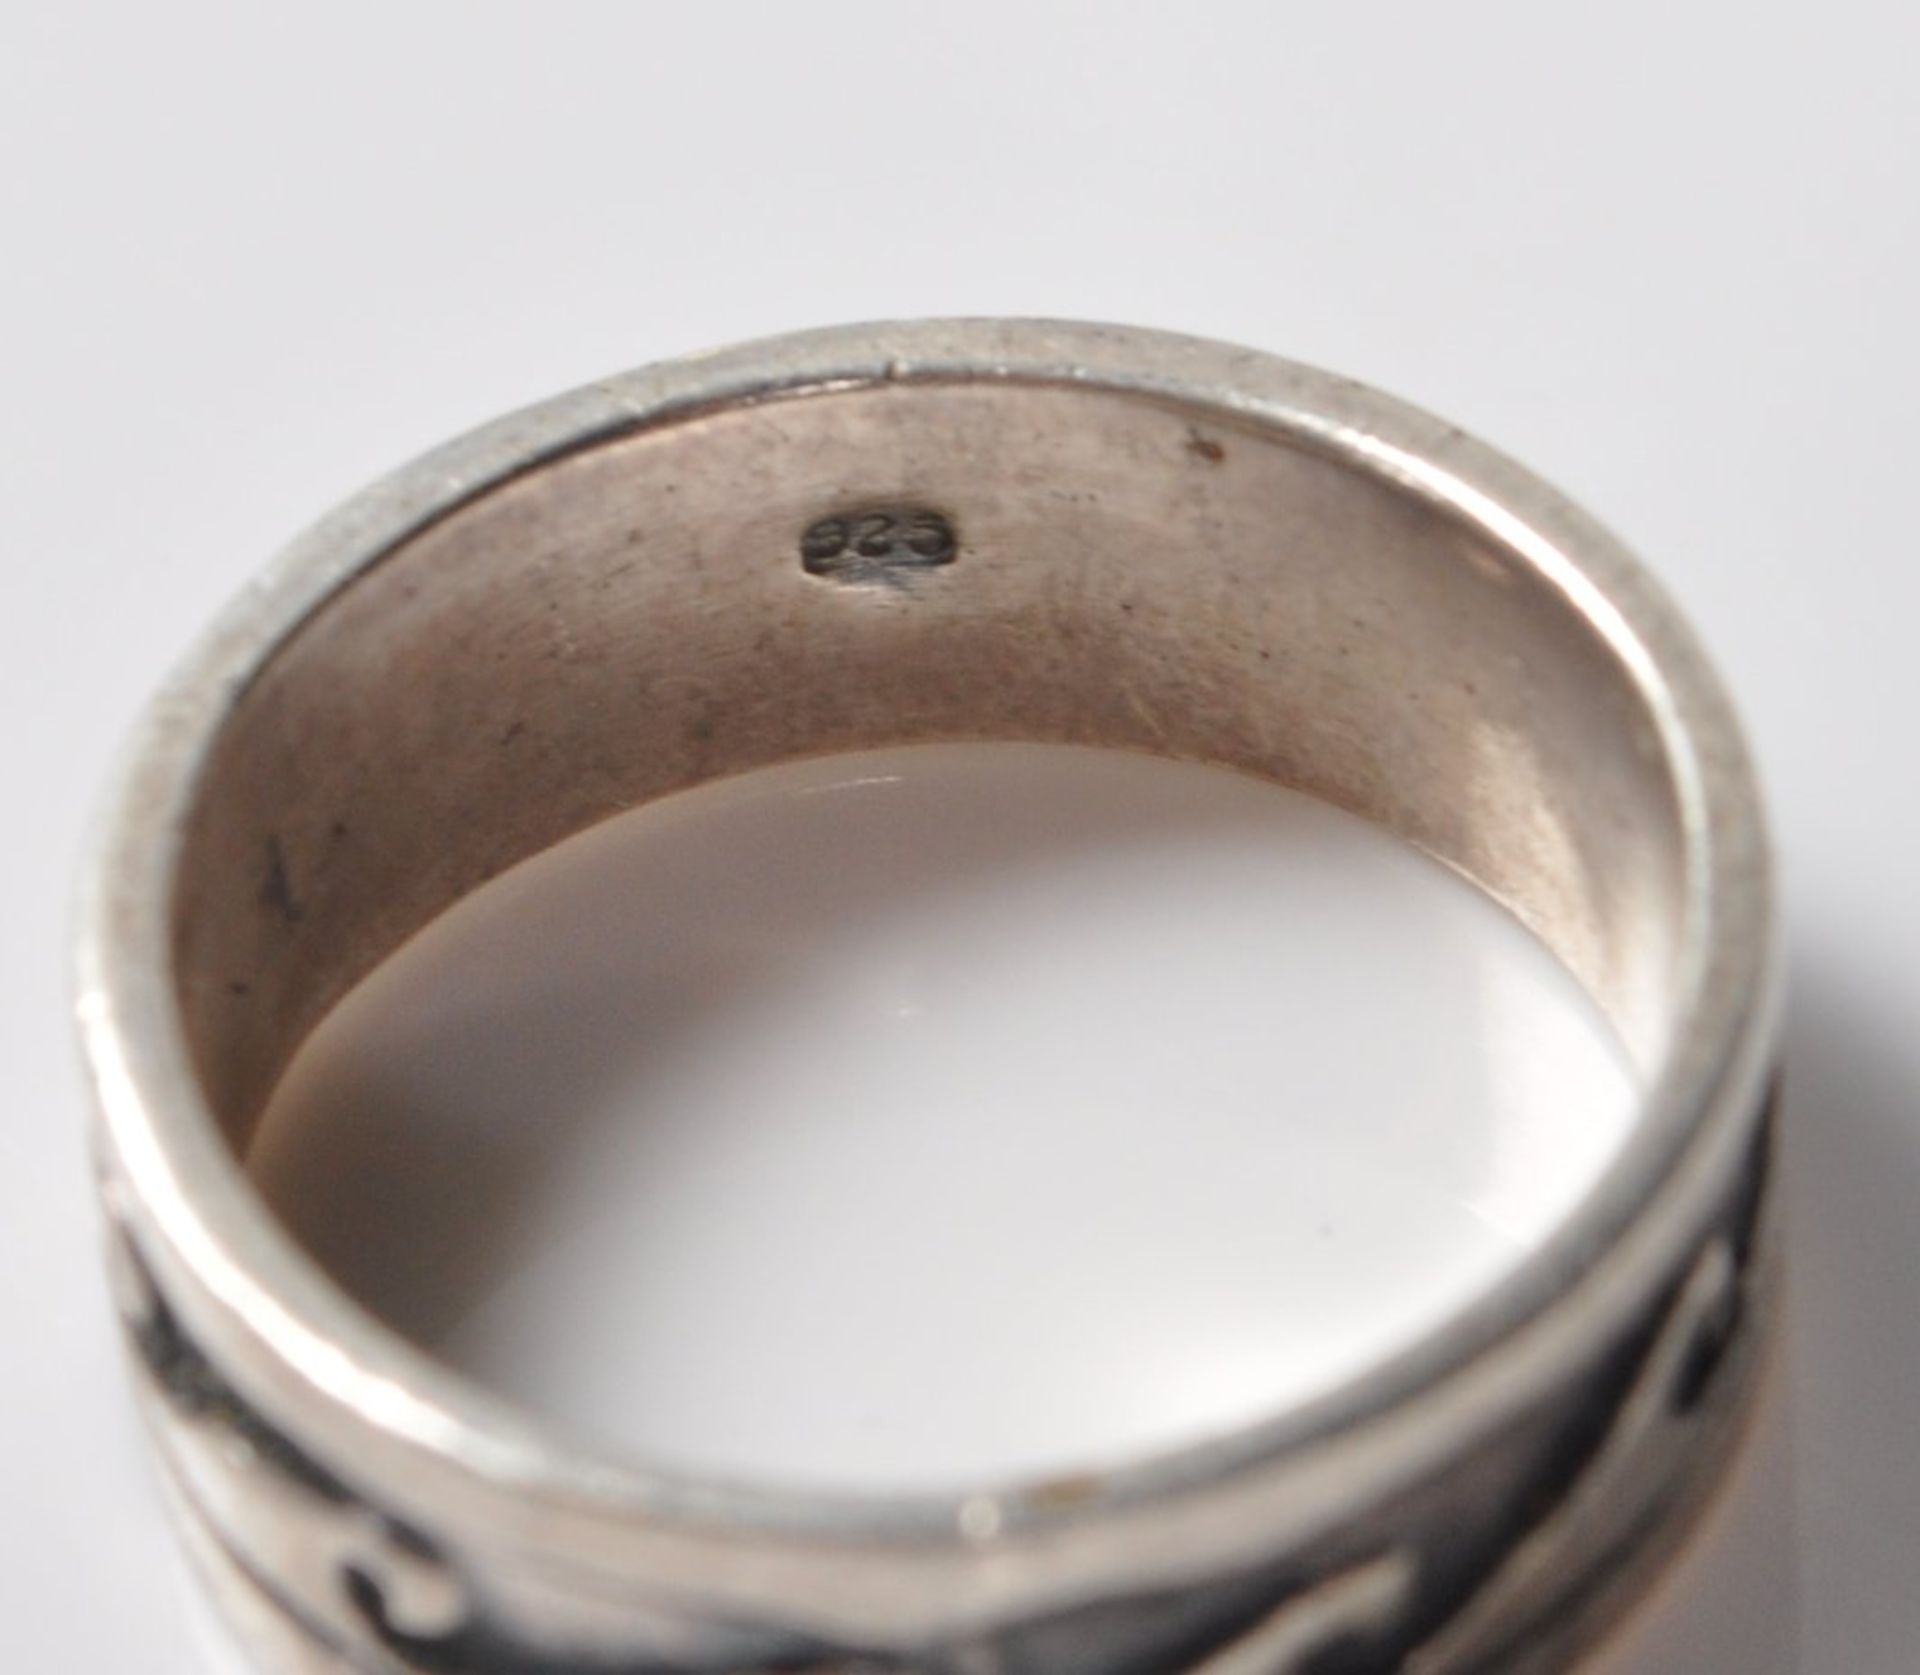 COLLECTION OF SILVER STAMPED 925 RINGS. - Image 12 of 12